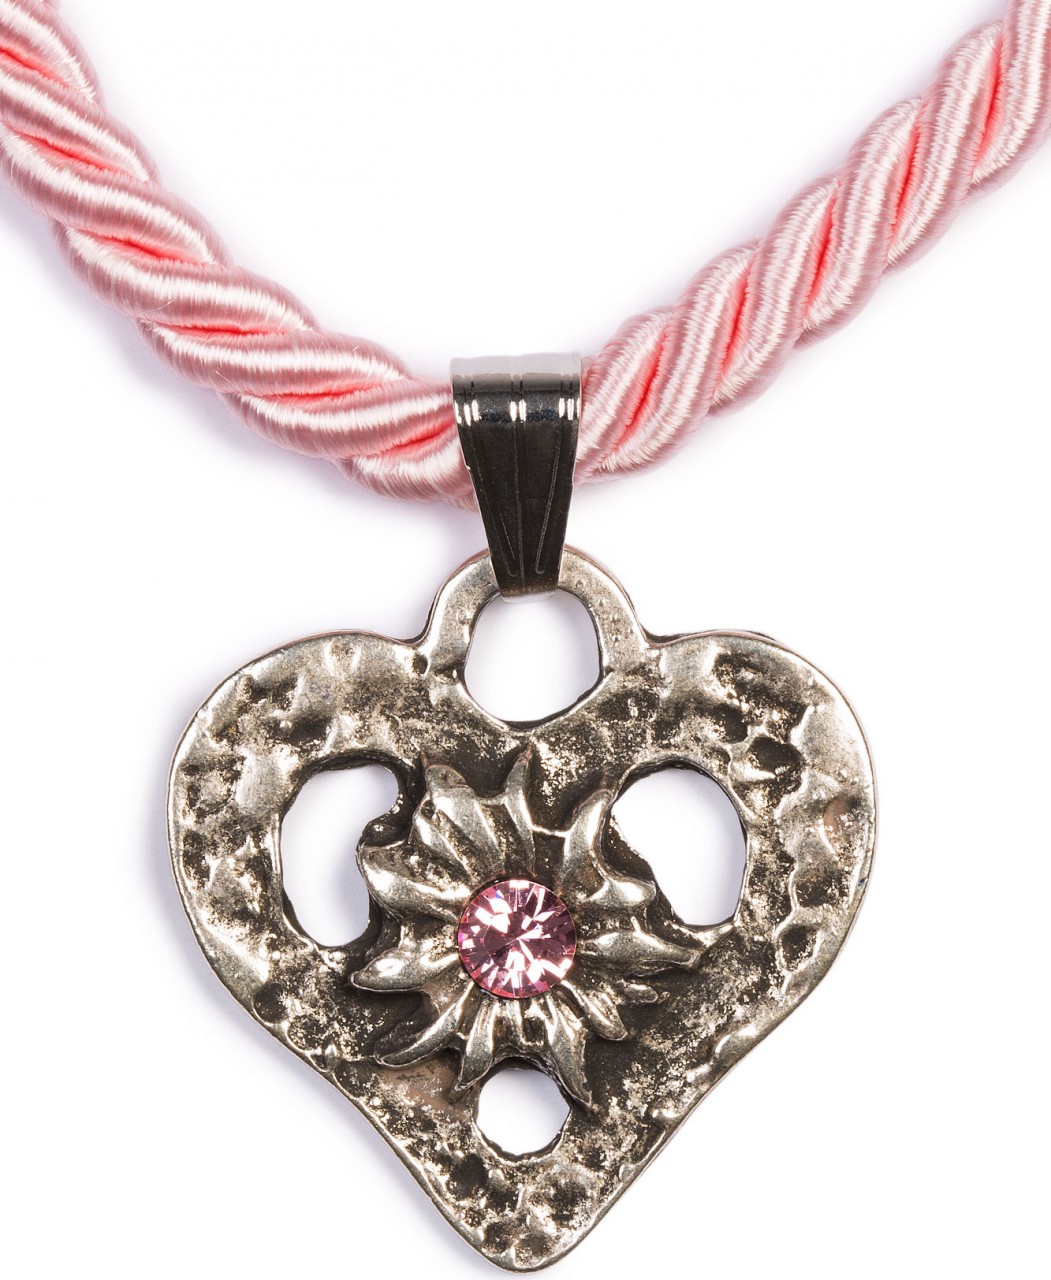 Braid Necklace with Heart Pendant, Rose Pink